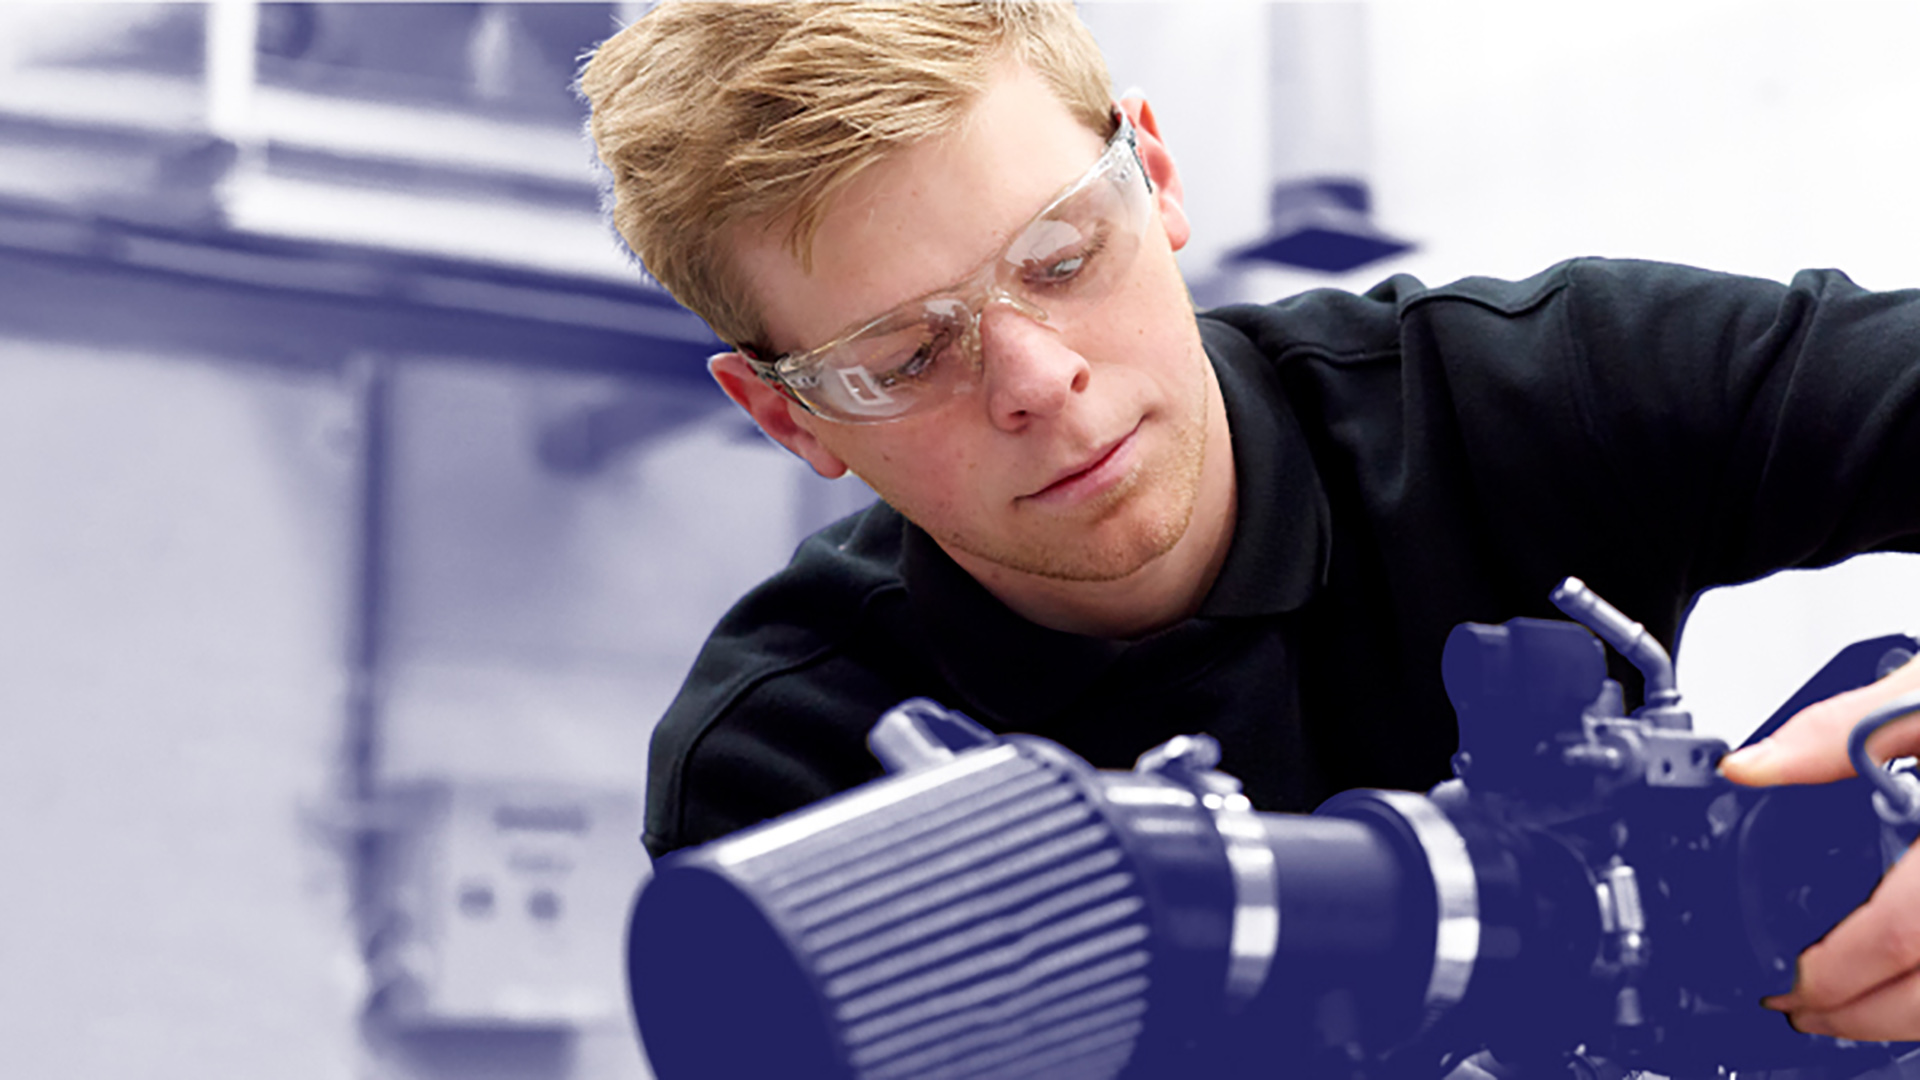 male student using science equipment wearing safely glasses